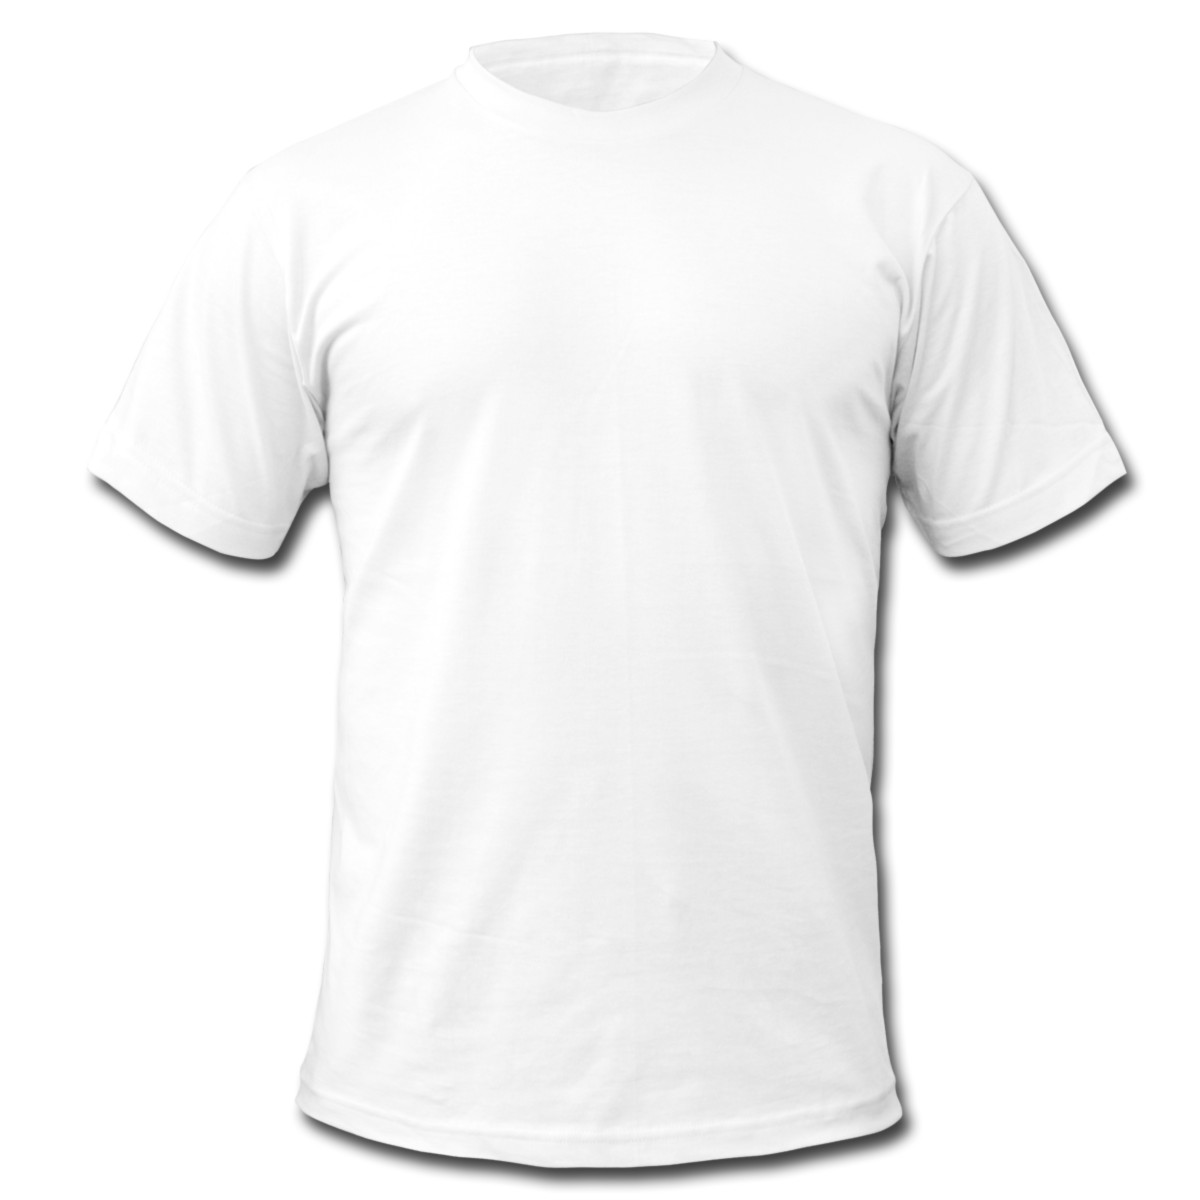 T-shirt White - TLR Striking Web Solutions